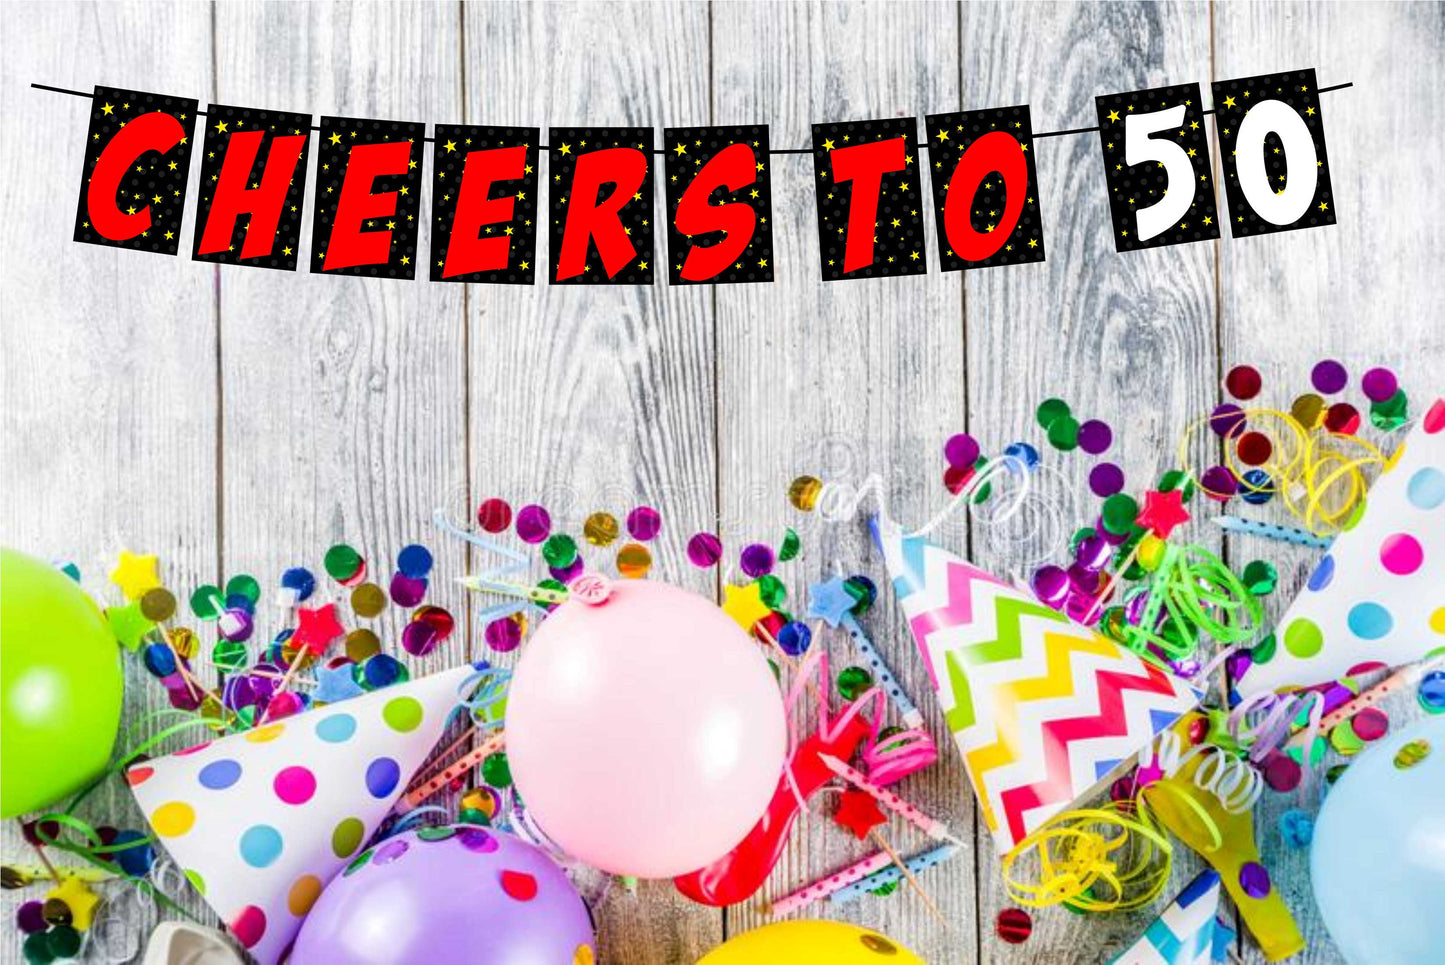 Cheers to 50 Birthday Banner for Photo Shoot Backdrop and Theme Party